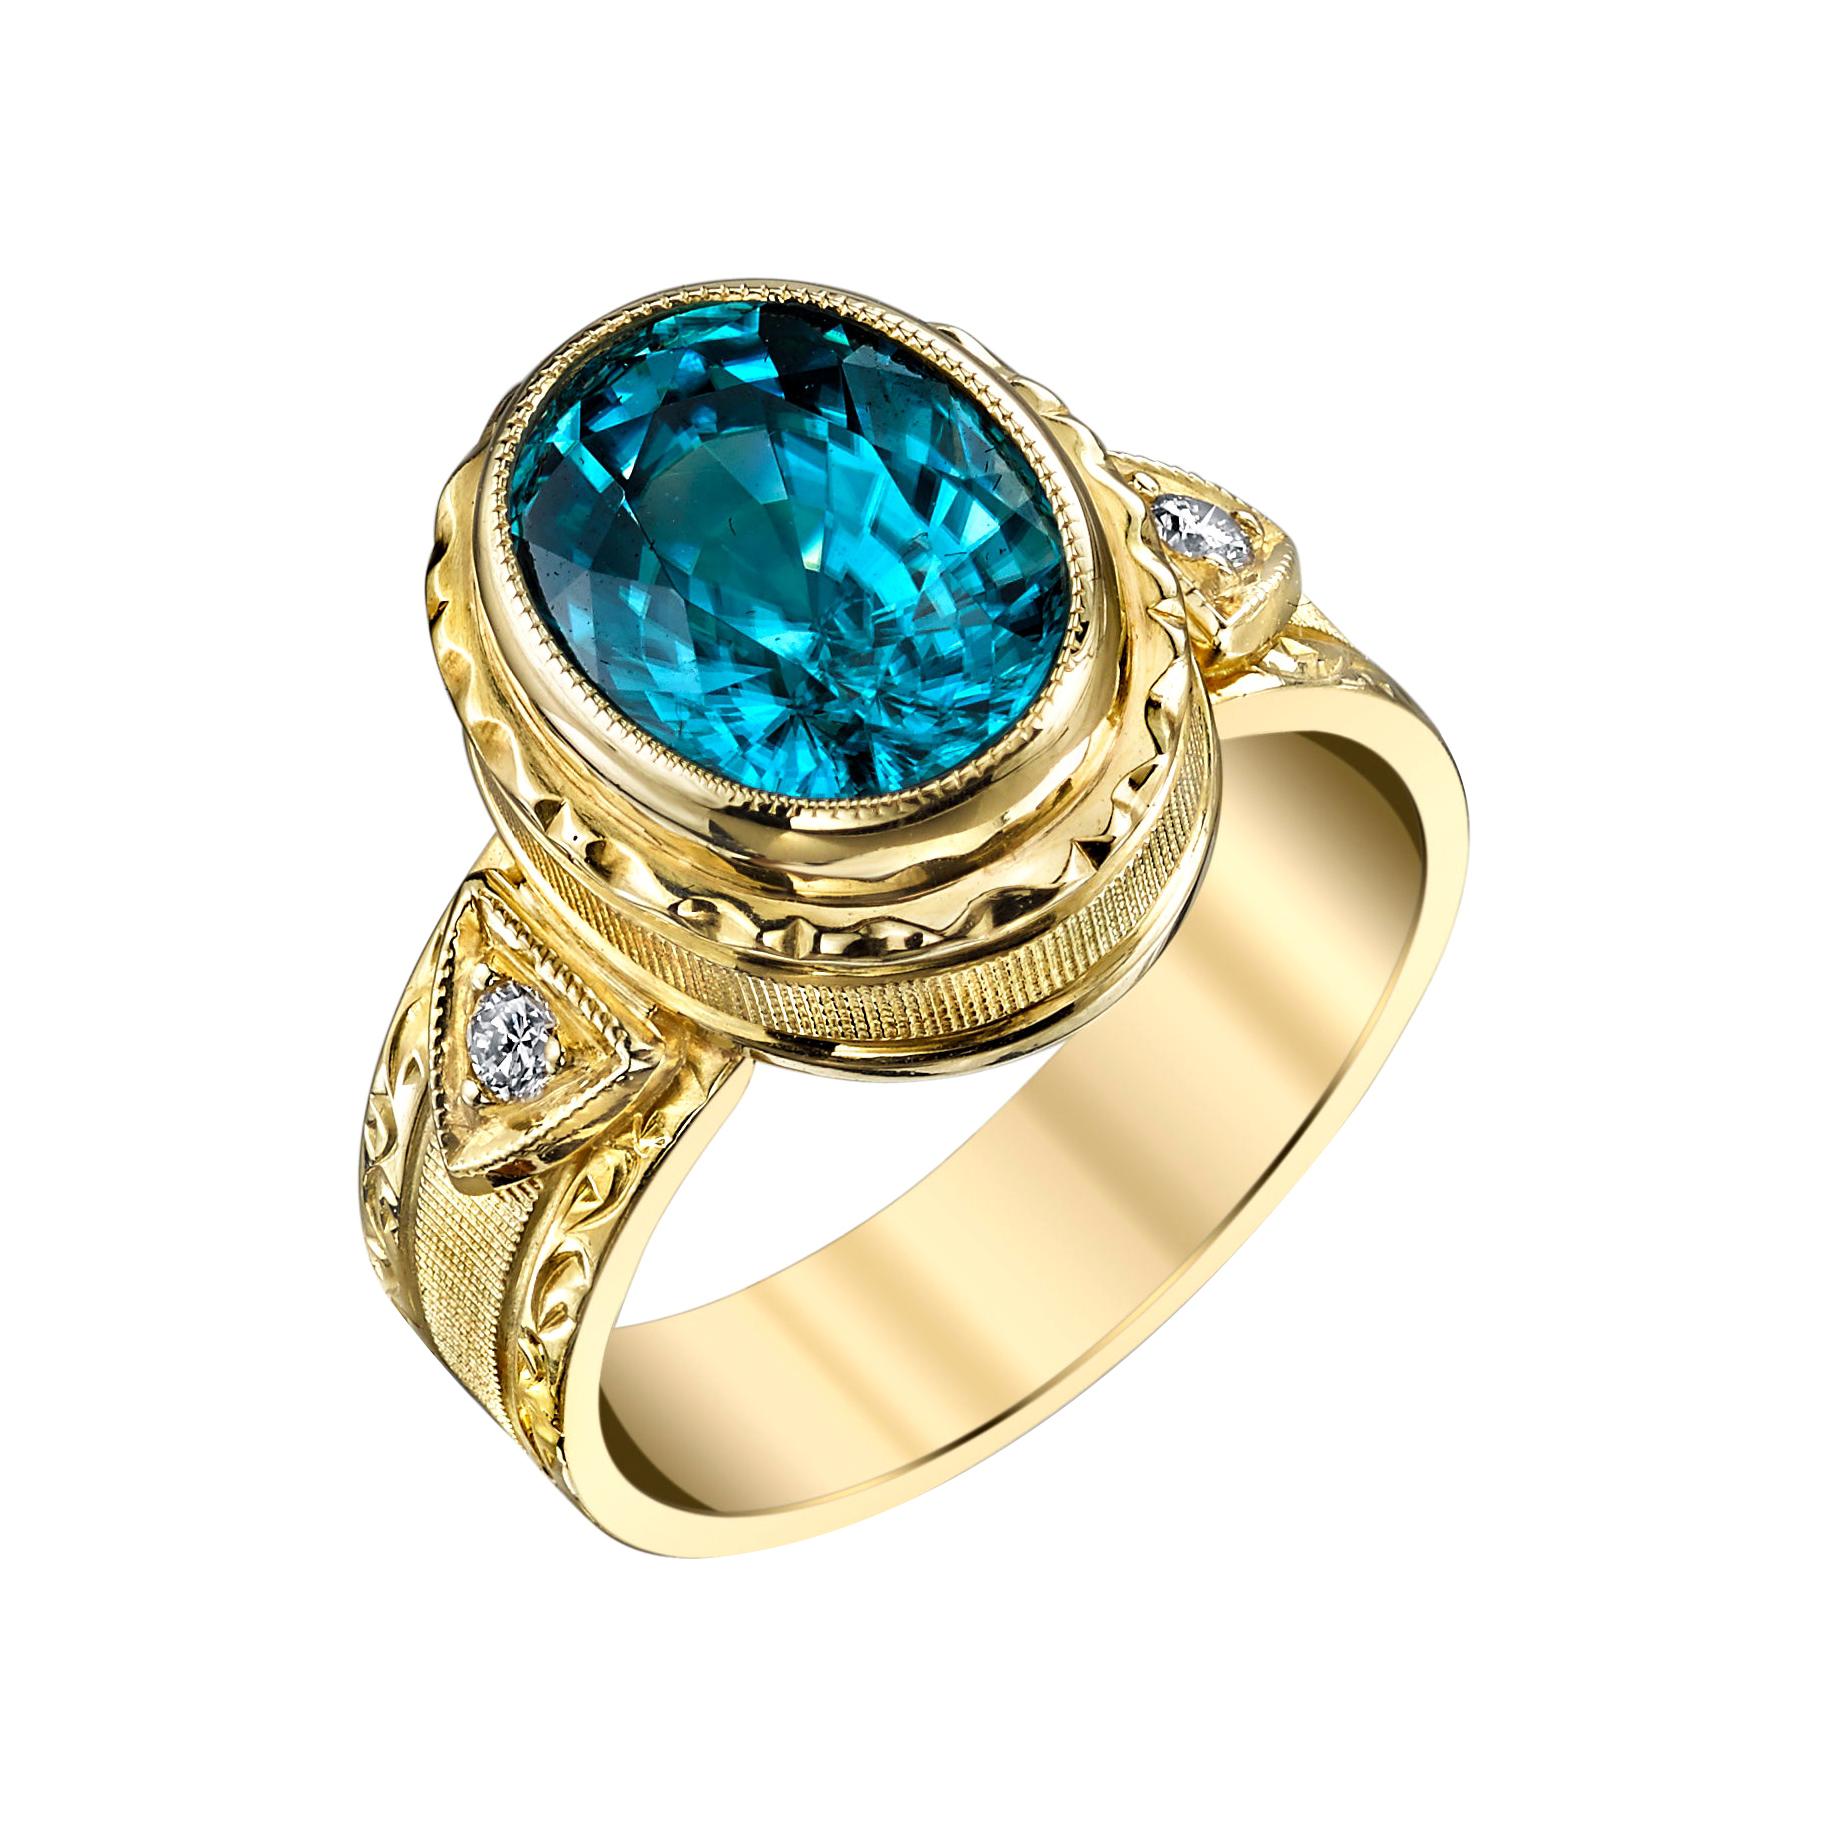 4.72 Carat Blue Zircon and Diamond Hand-Engraved Band Ring in 18k Yellow Gold   For Sale